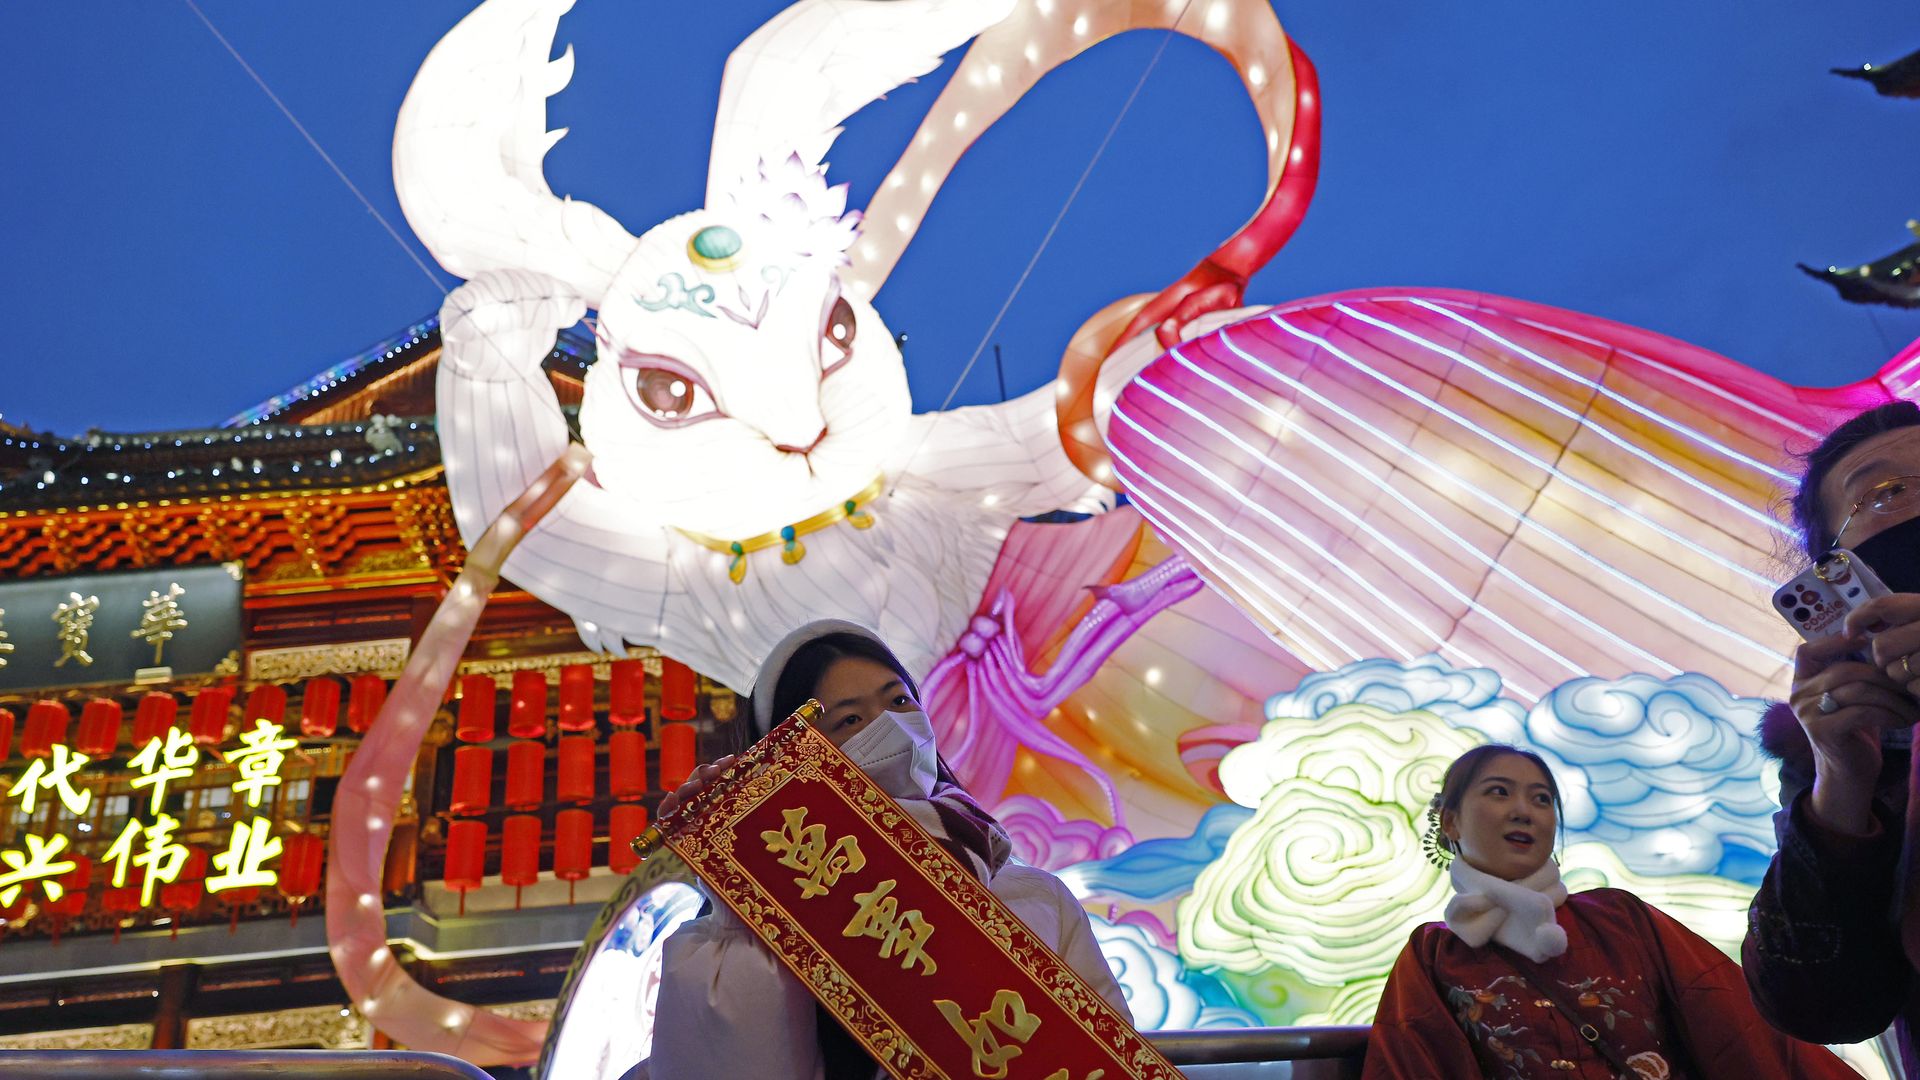 Tourists pose for photos in front of an illuminated rabbit lantern during a lantern fair at Yuyuan Garden on New Year's Day on January 1, 2023 in Shanghai, China.